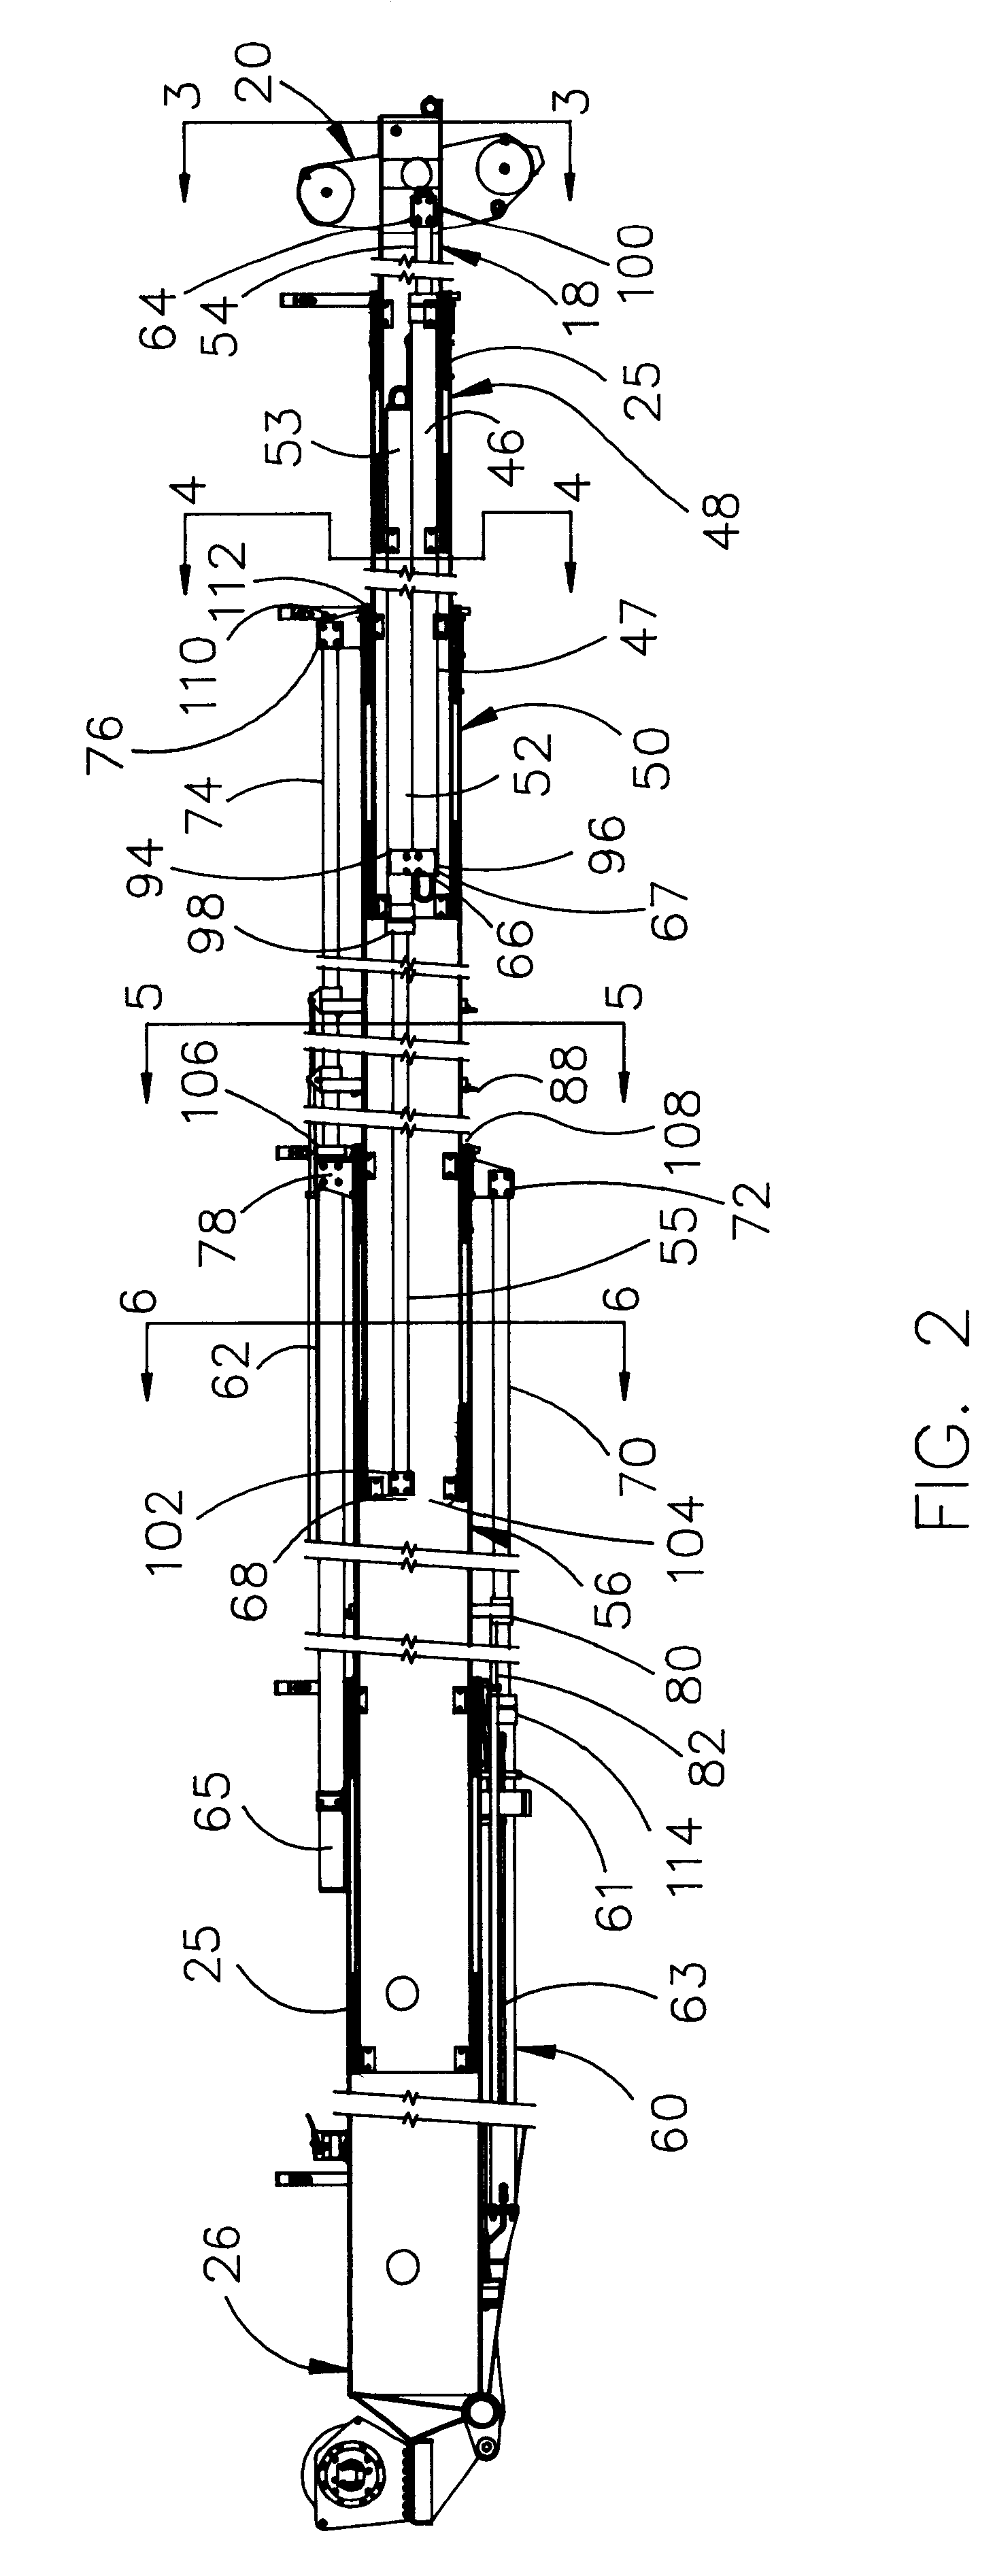 Method and apparatus for telescoping boom with hydraulic extension actuators